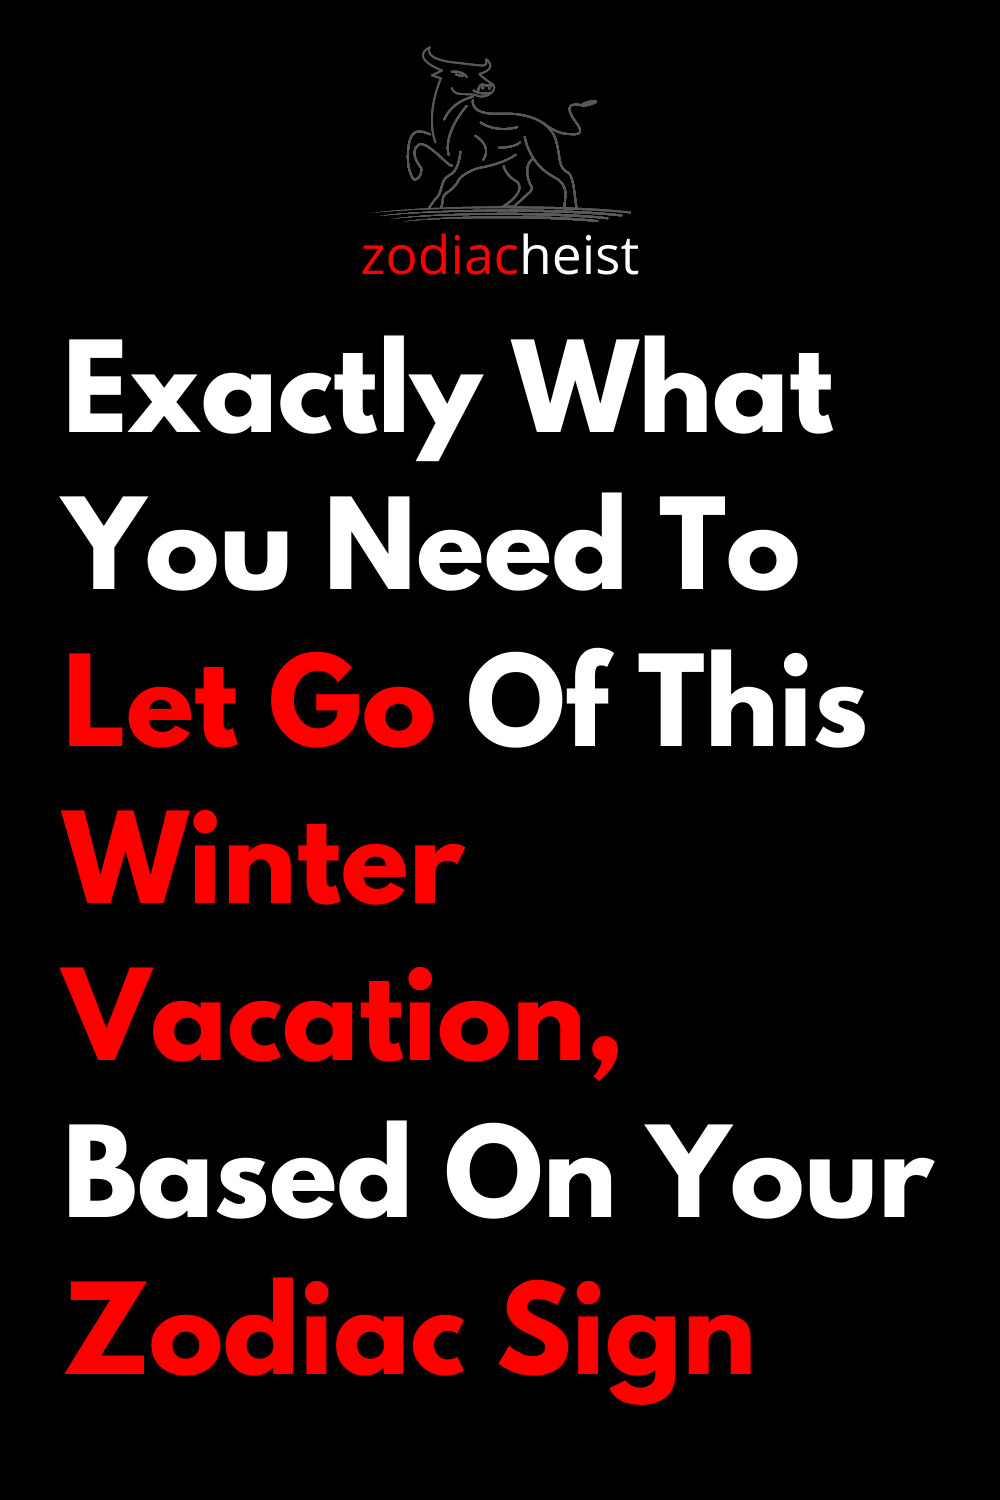 Exactly What You Need To Let Go Of This Winter Vacation, Based On Your Zodiac Sign